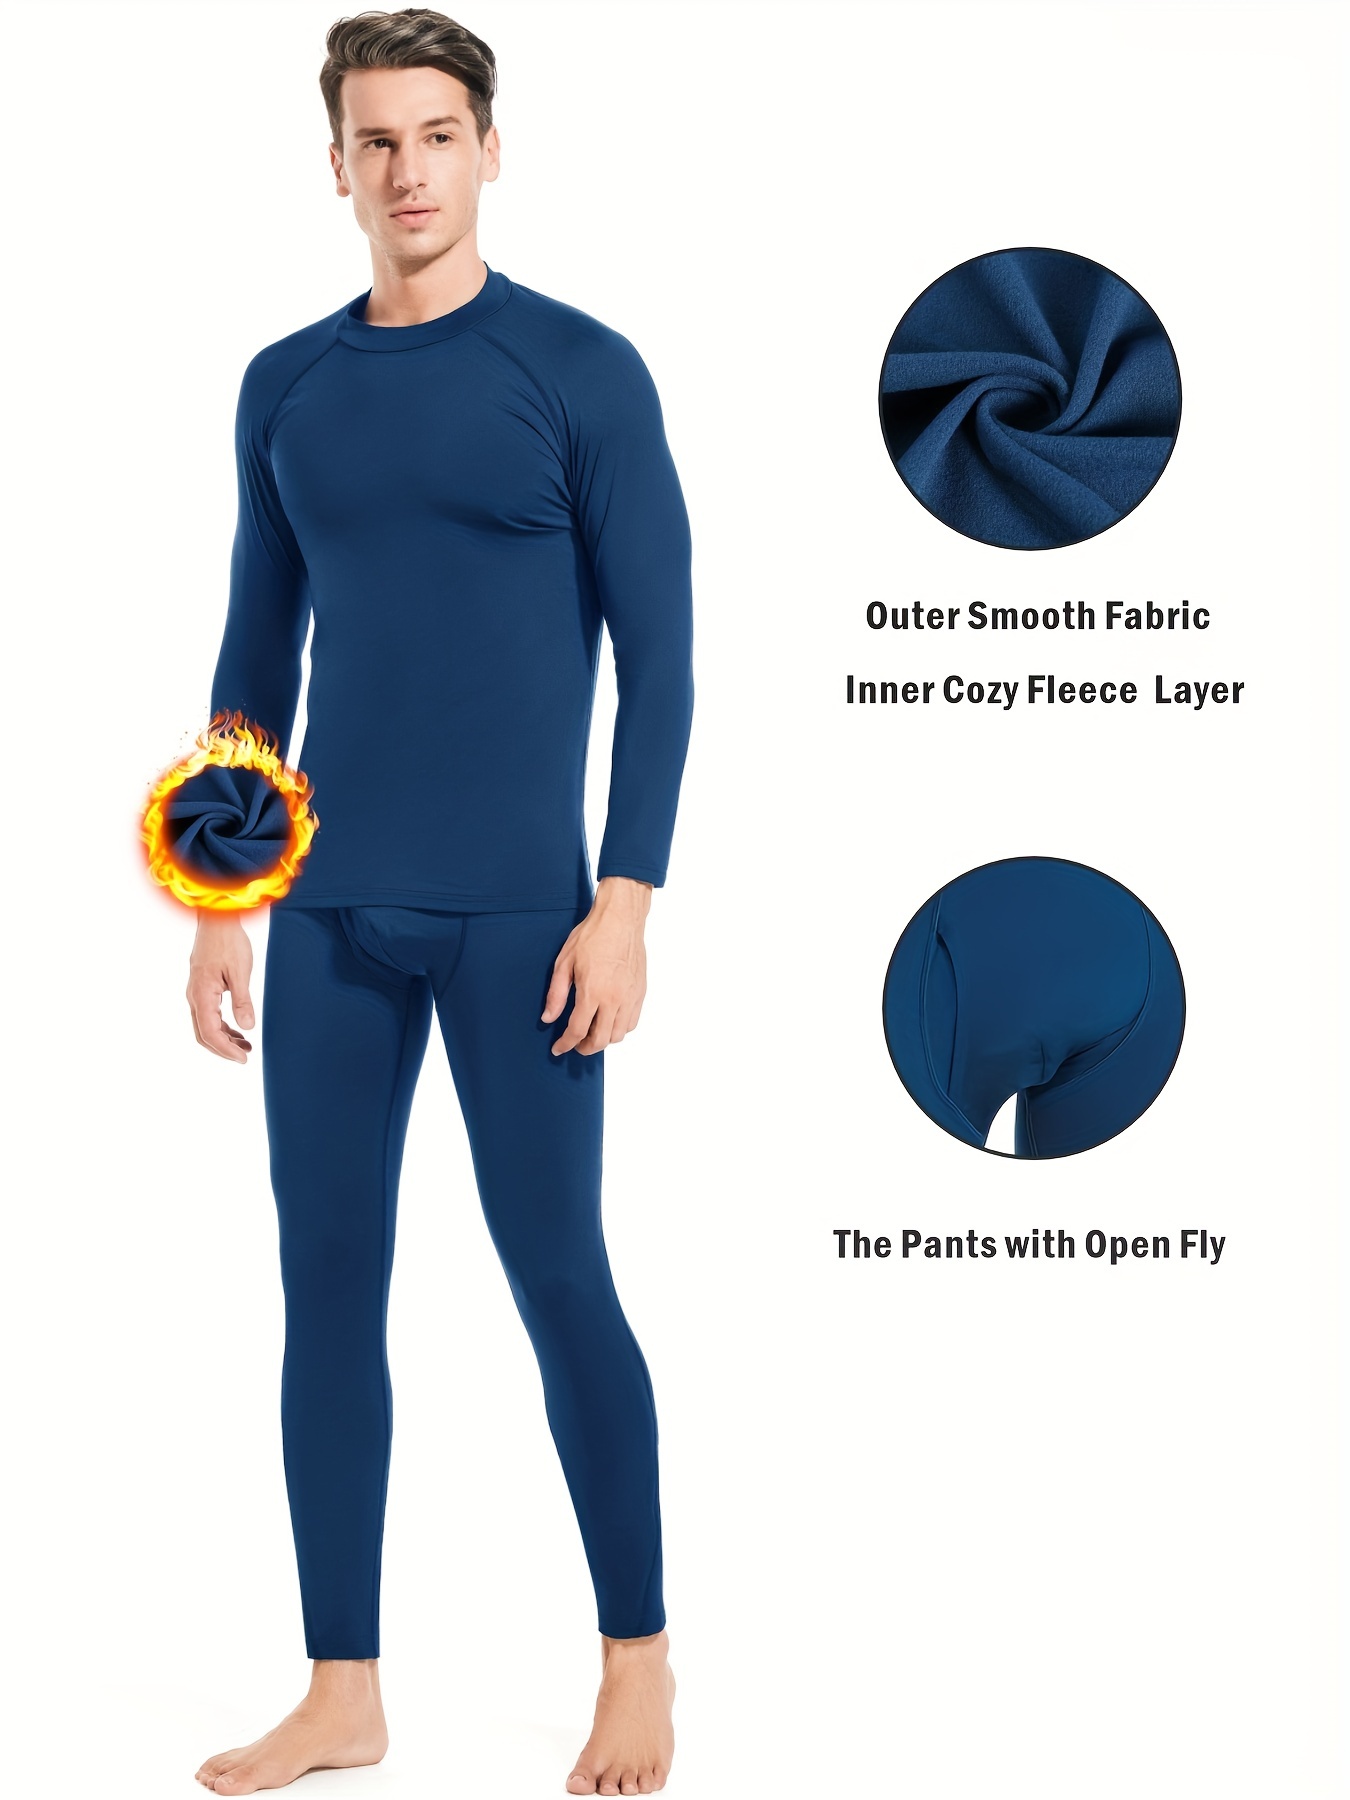 Mens Thermal Underwear Set, Fleece Long Johns for Men Extreme Cold Winter -  XL 